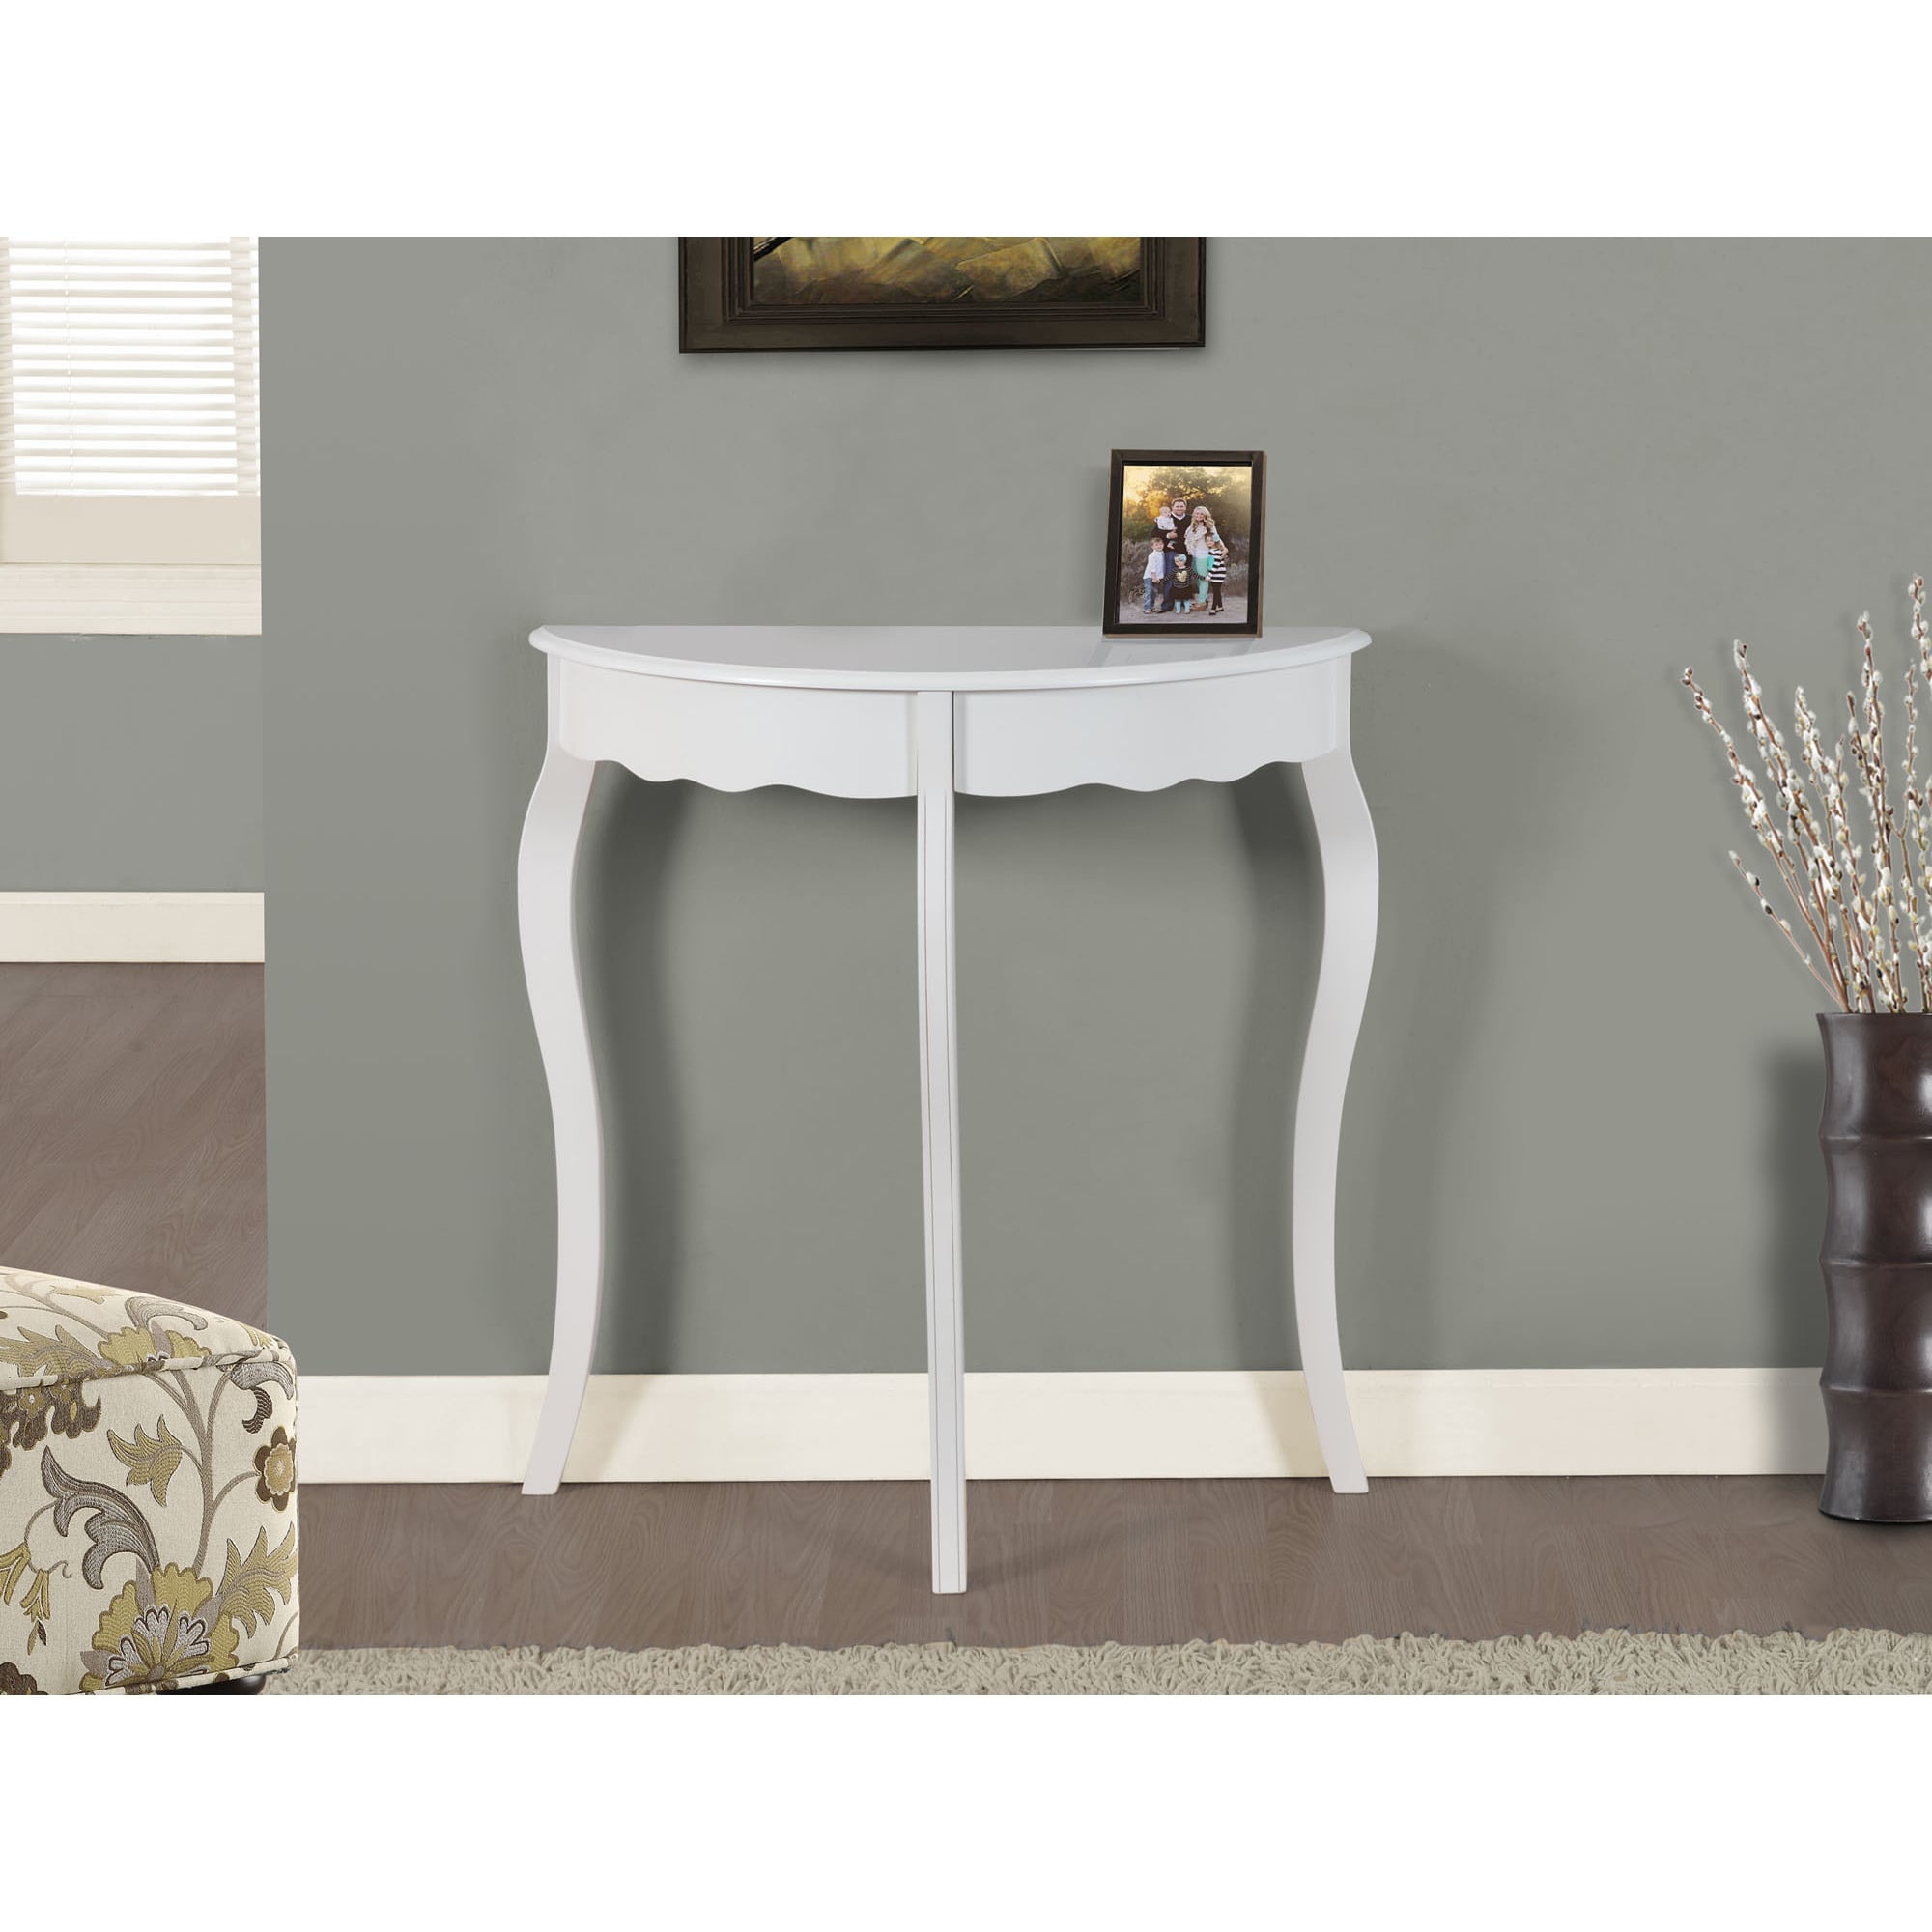 accent table antique white hall console free shipping today cast aluminum end summer outdoor clearance ice box cooler side odd coffee tables small metal legs round glass top black